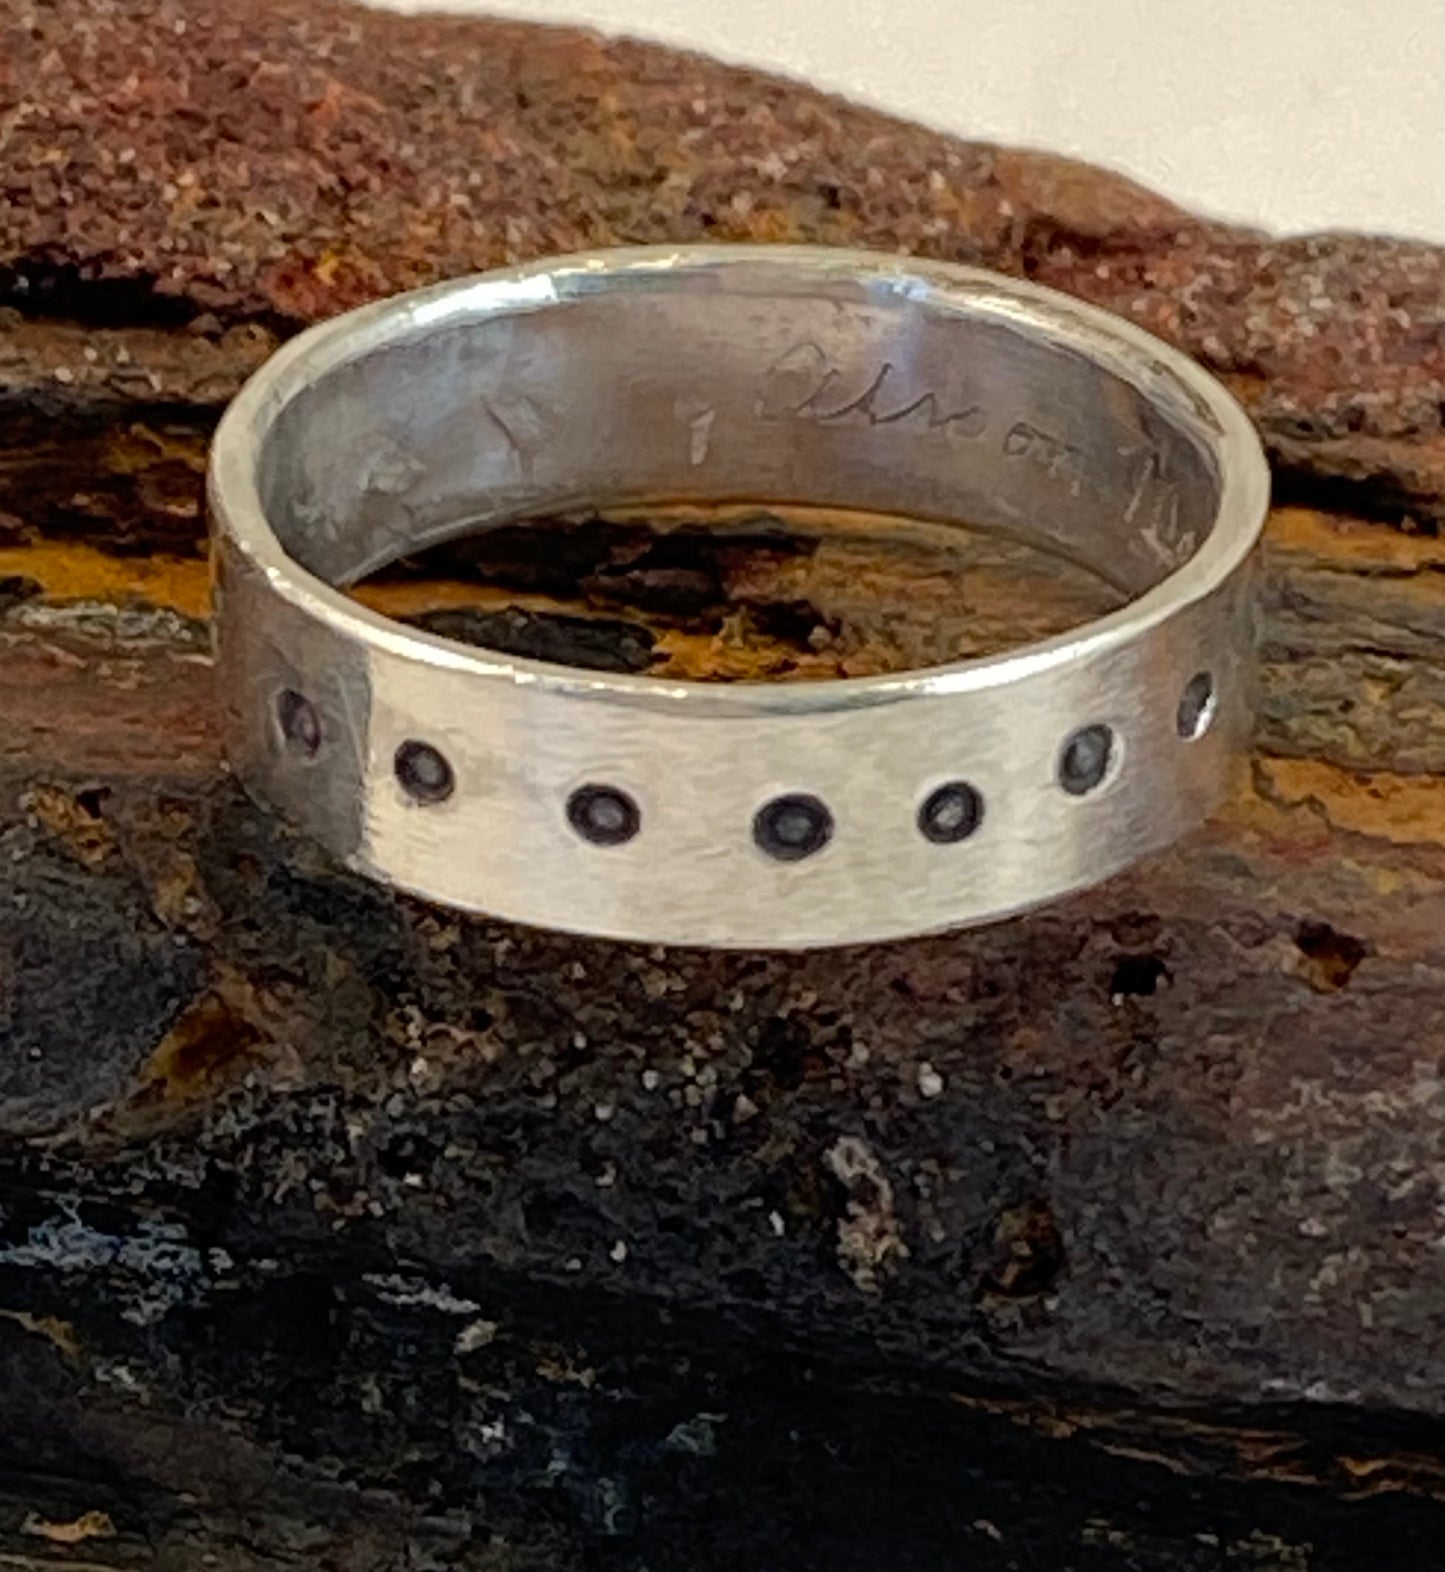 One-of-a-kind hand-crafted sterling silver "cigar band" ring. Band is adorned with an accent star, and with dots stamped around the ring. Ring size 8-1/4. Style: rustic, boho, funky, organic, earthy yet elegant.